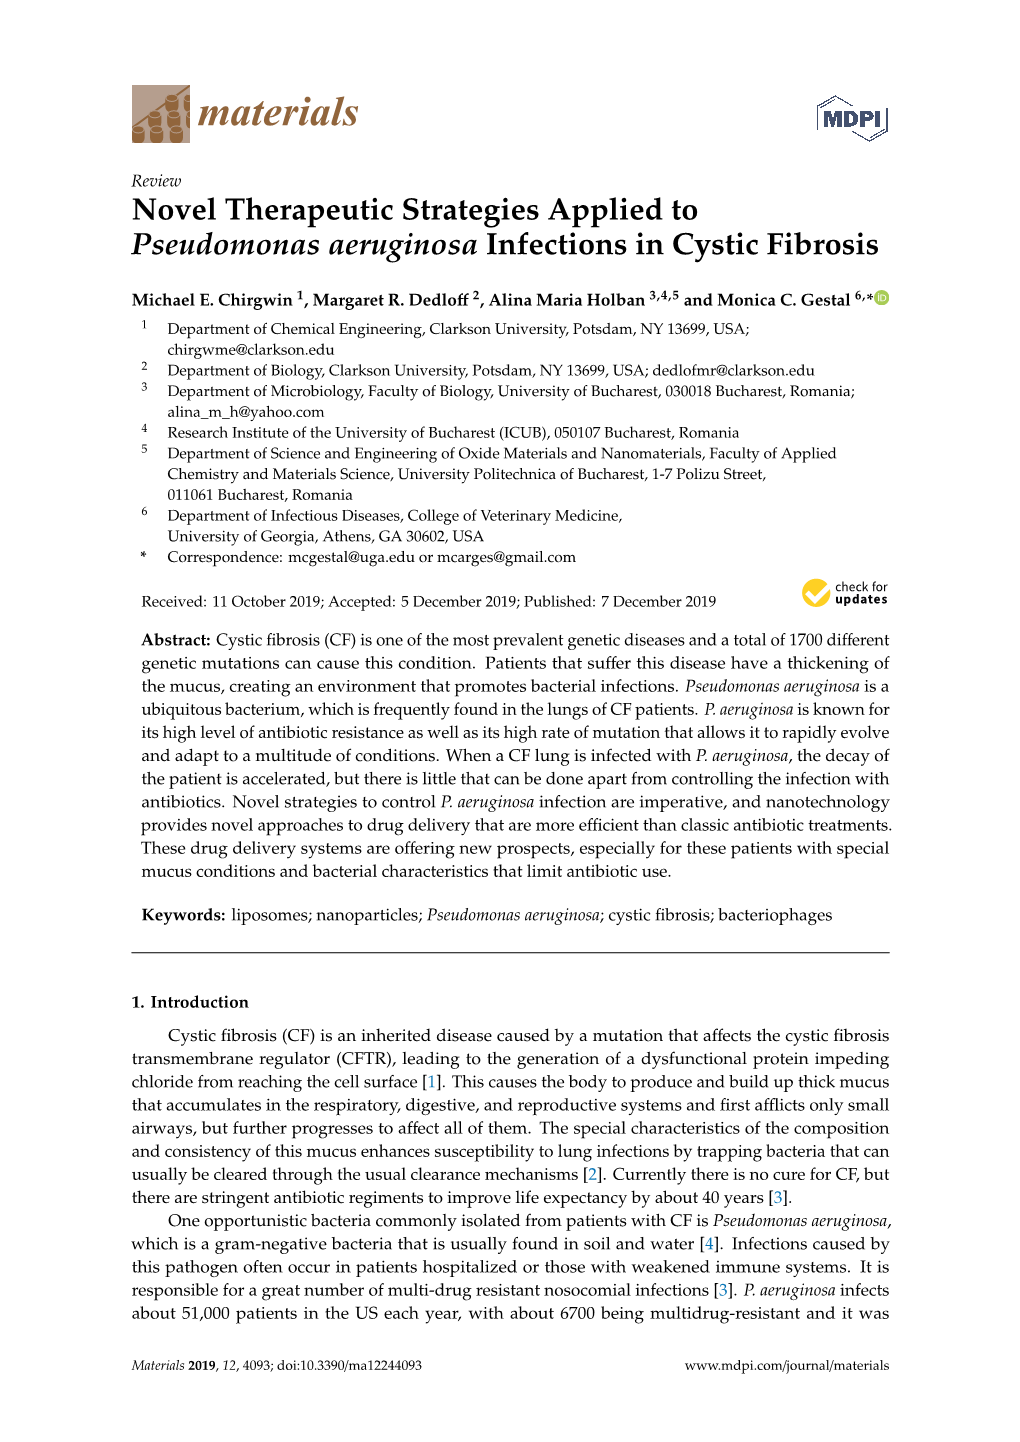 Novel Therapeutic Strategies Applied to Pseudomonas Aeruginosa Infections in Cystic Fibrosis